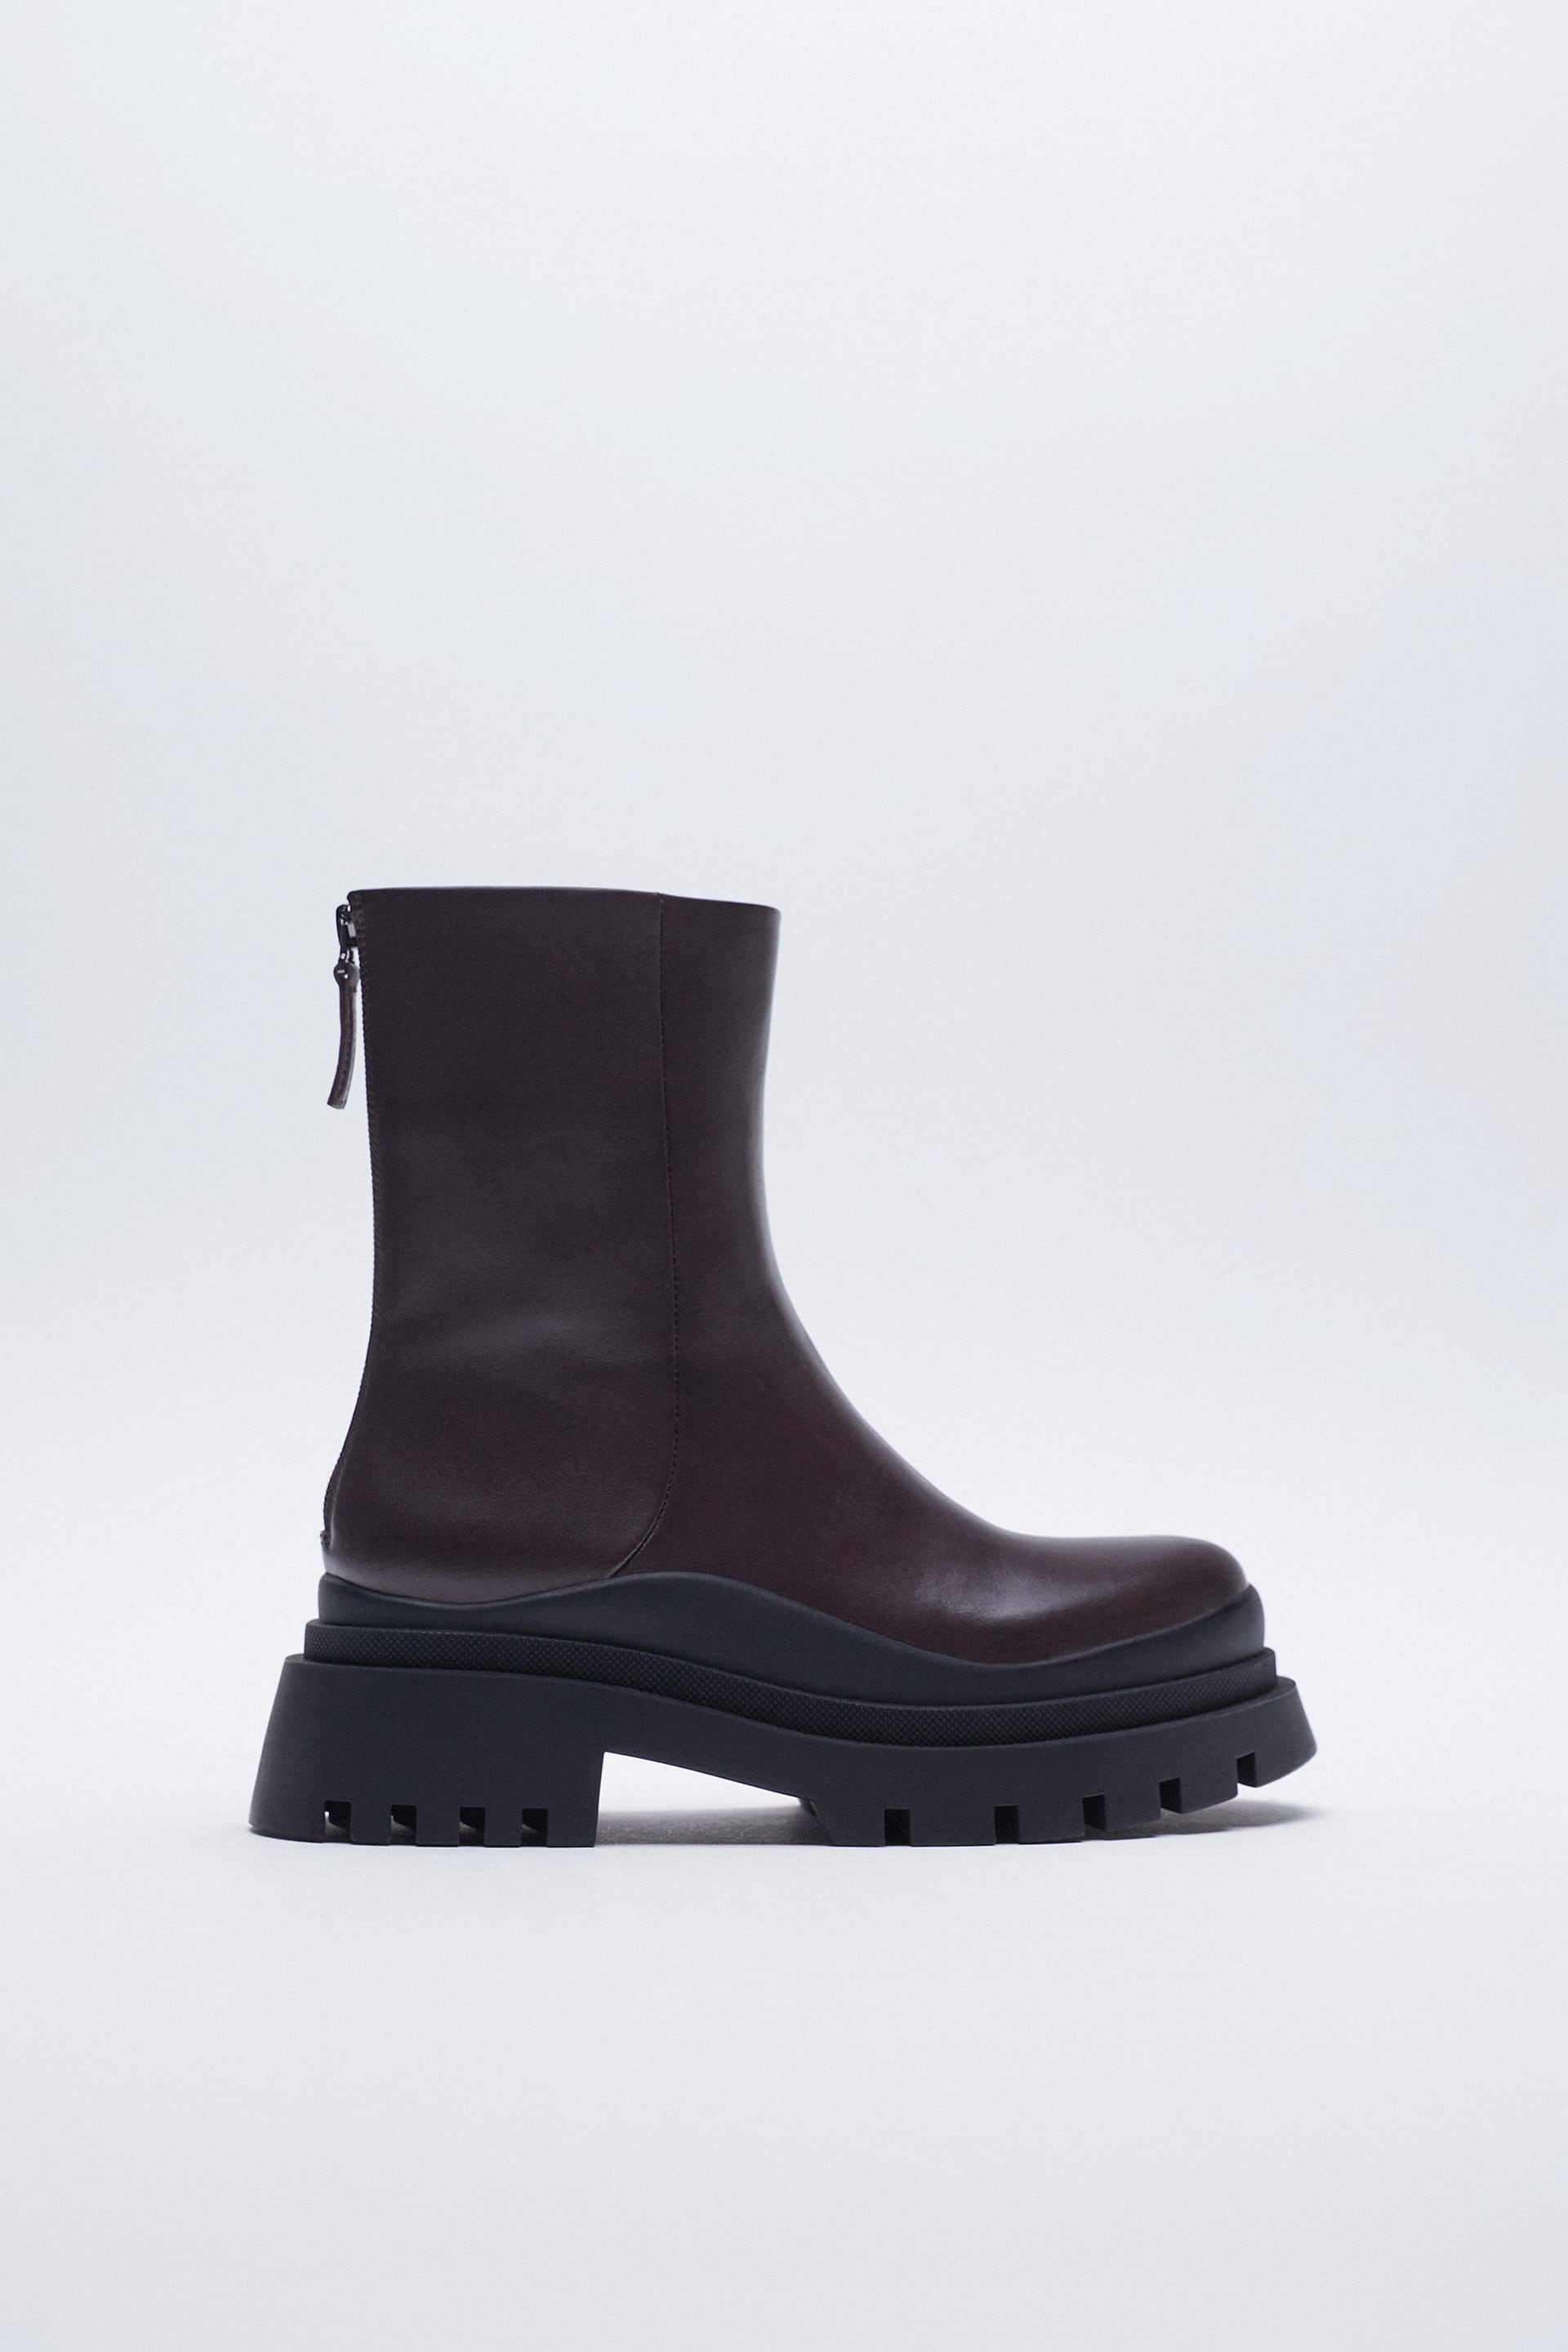 The 30 Best Winter Boots at Zara | Who What Wear